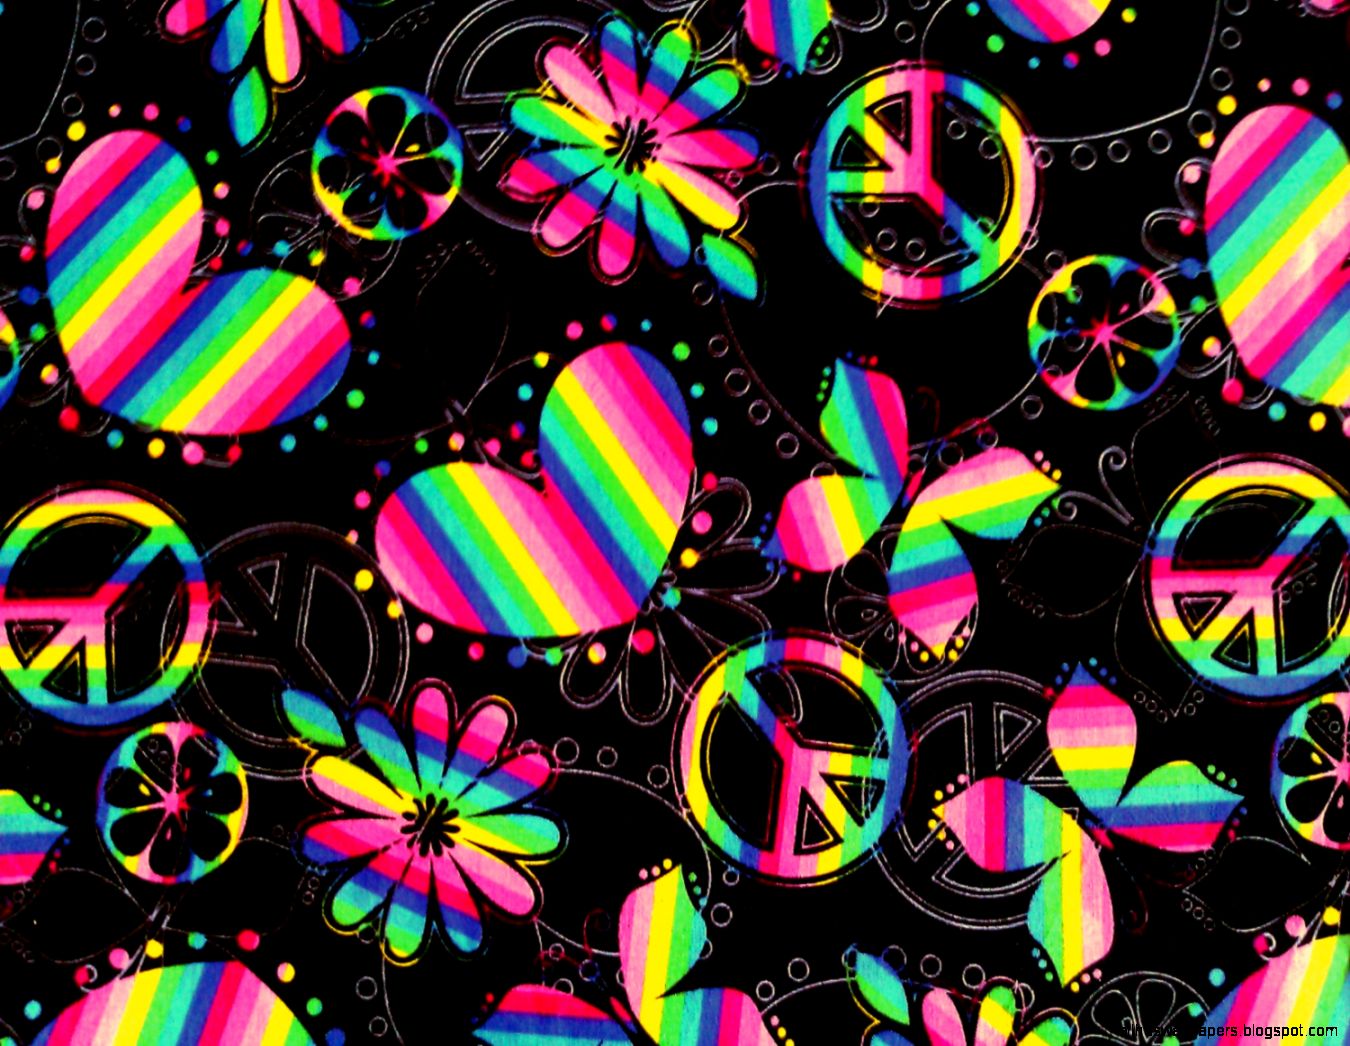 Zebra Peace Sign Wallpapers - Neon Rainbow Peace Sign - HD Wallpaper 